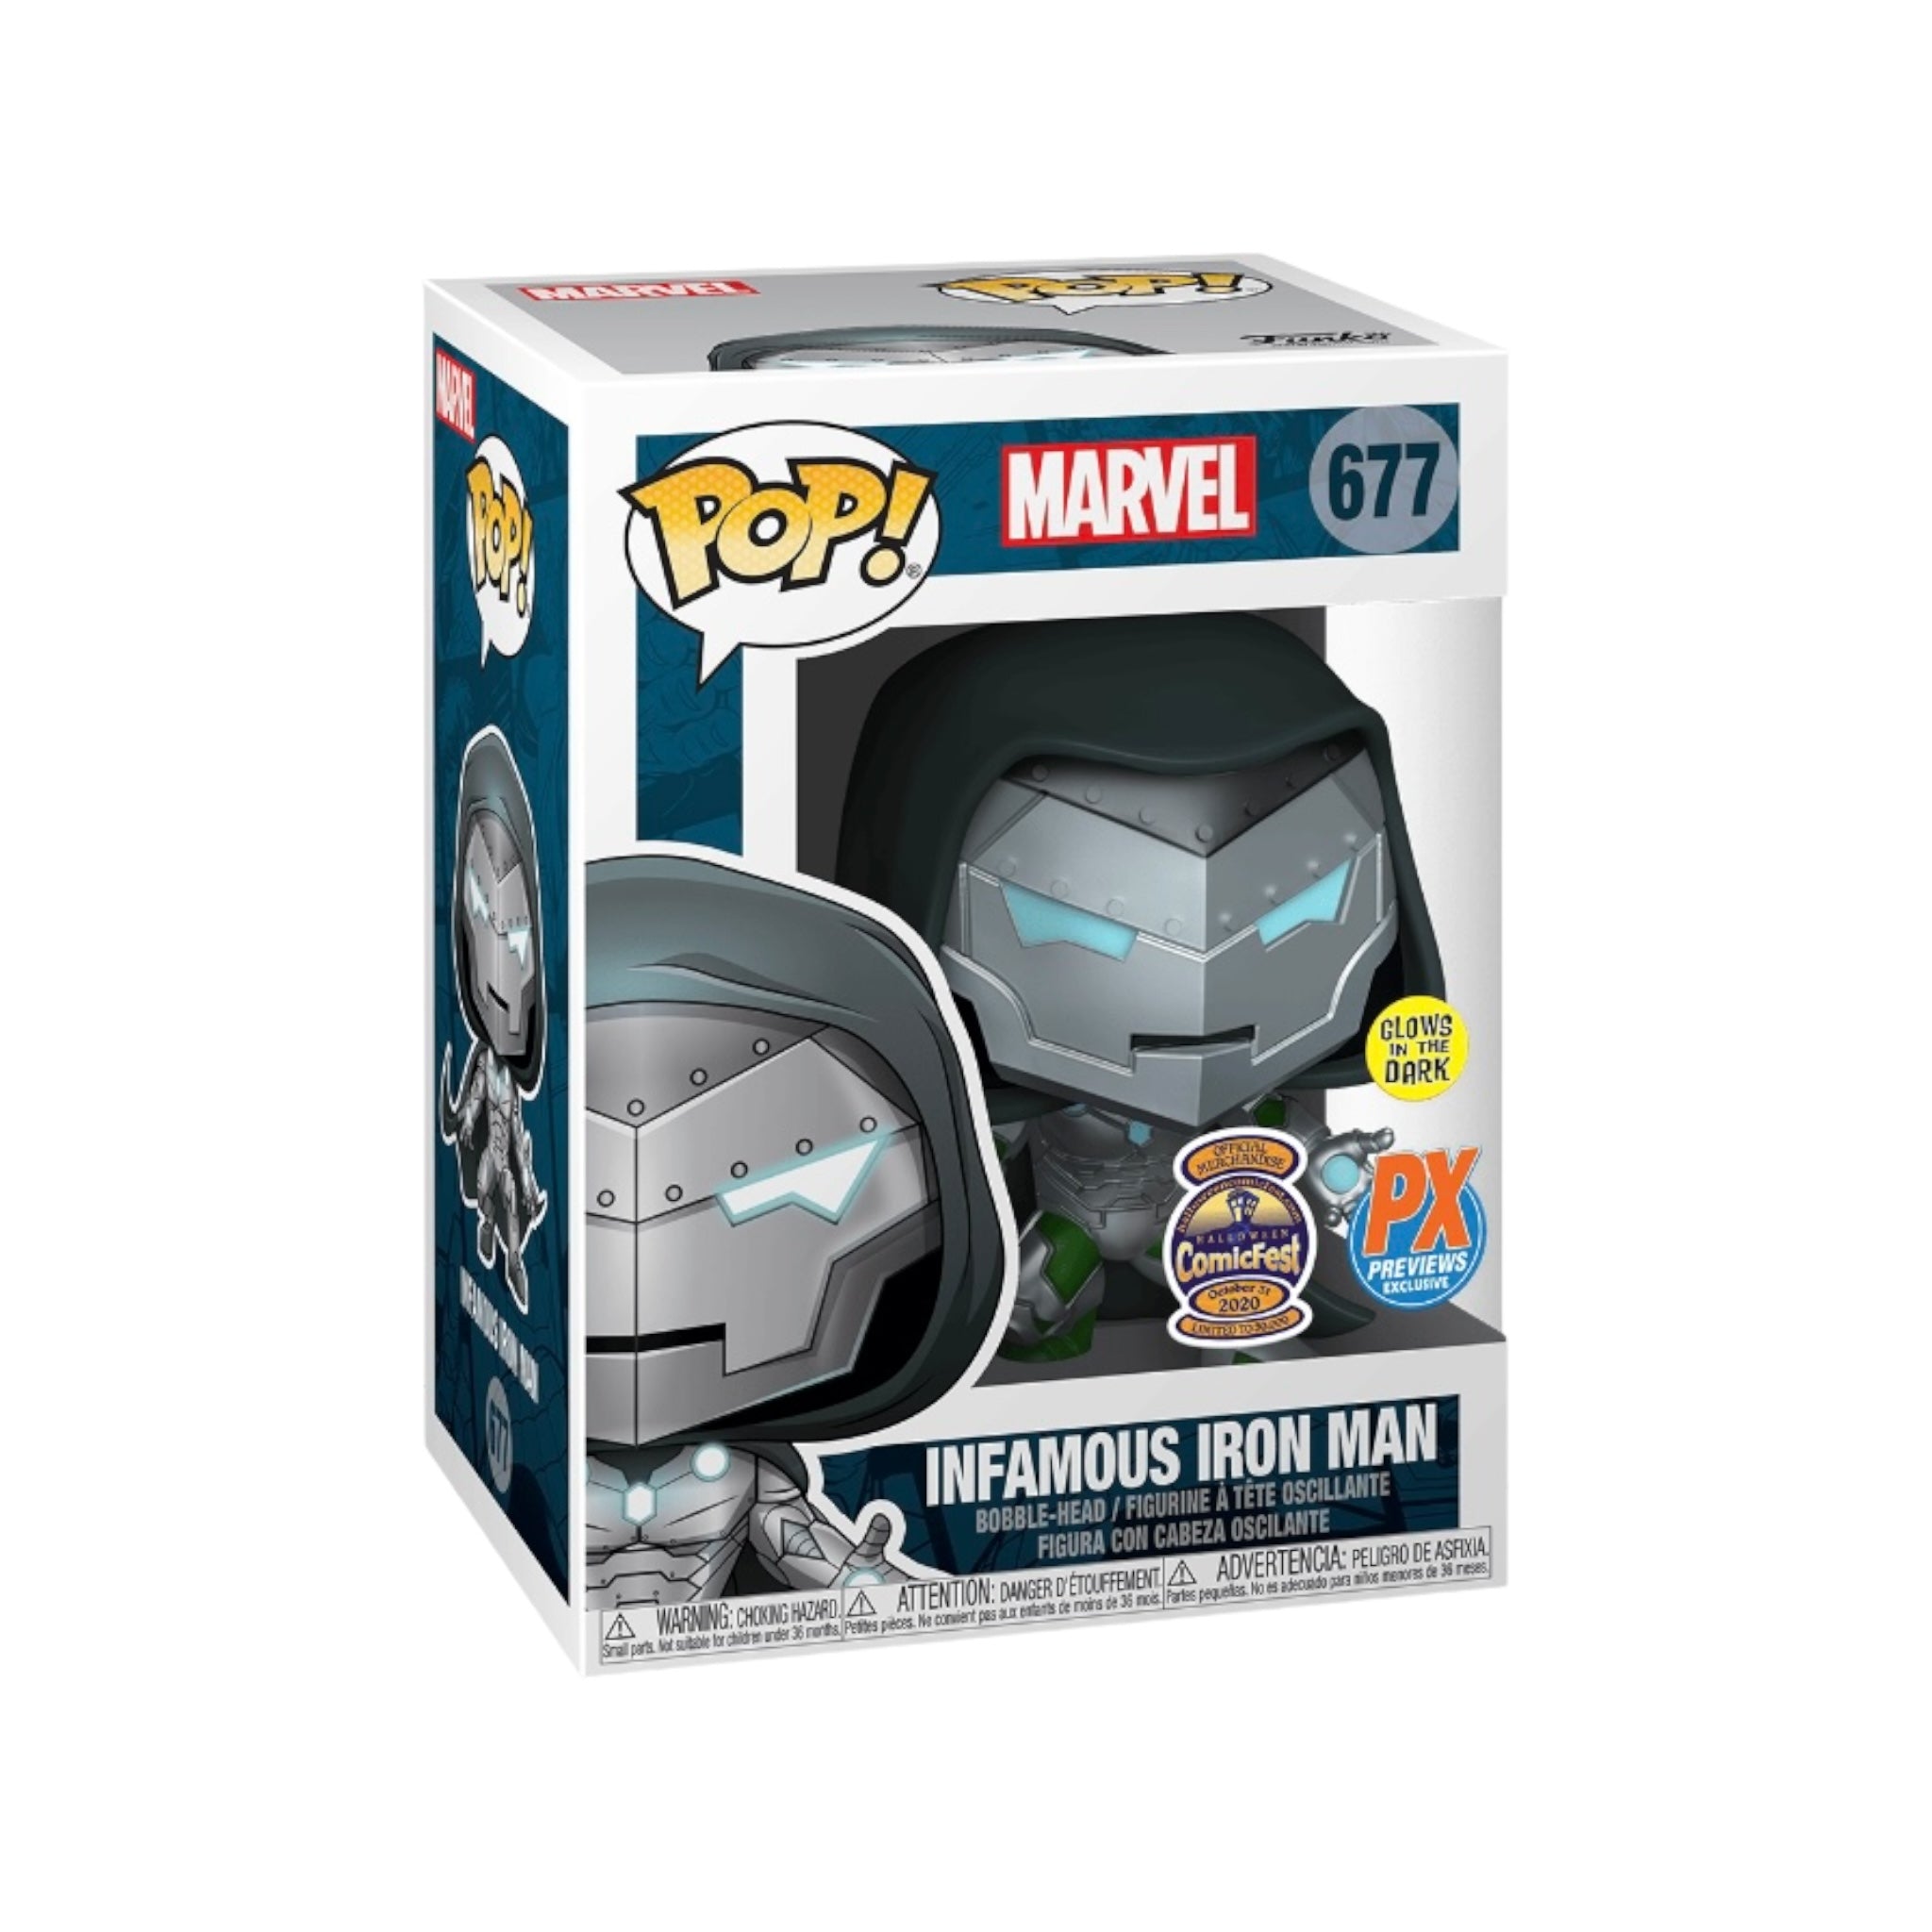 Infamous Iron Man #677 (Glows in the Dark) Funko Pop! - Marvel - Halloween Comicfest 2020 / Px Previews Exclusive LE30000 Pcs